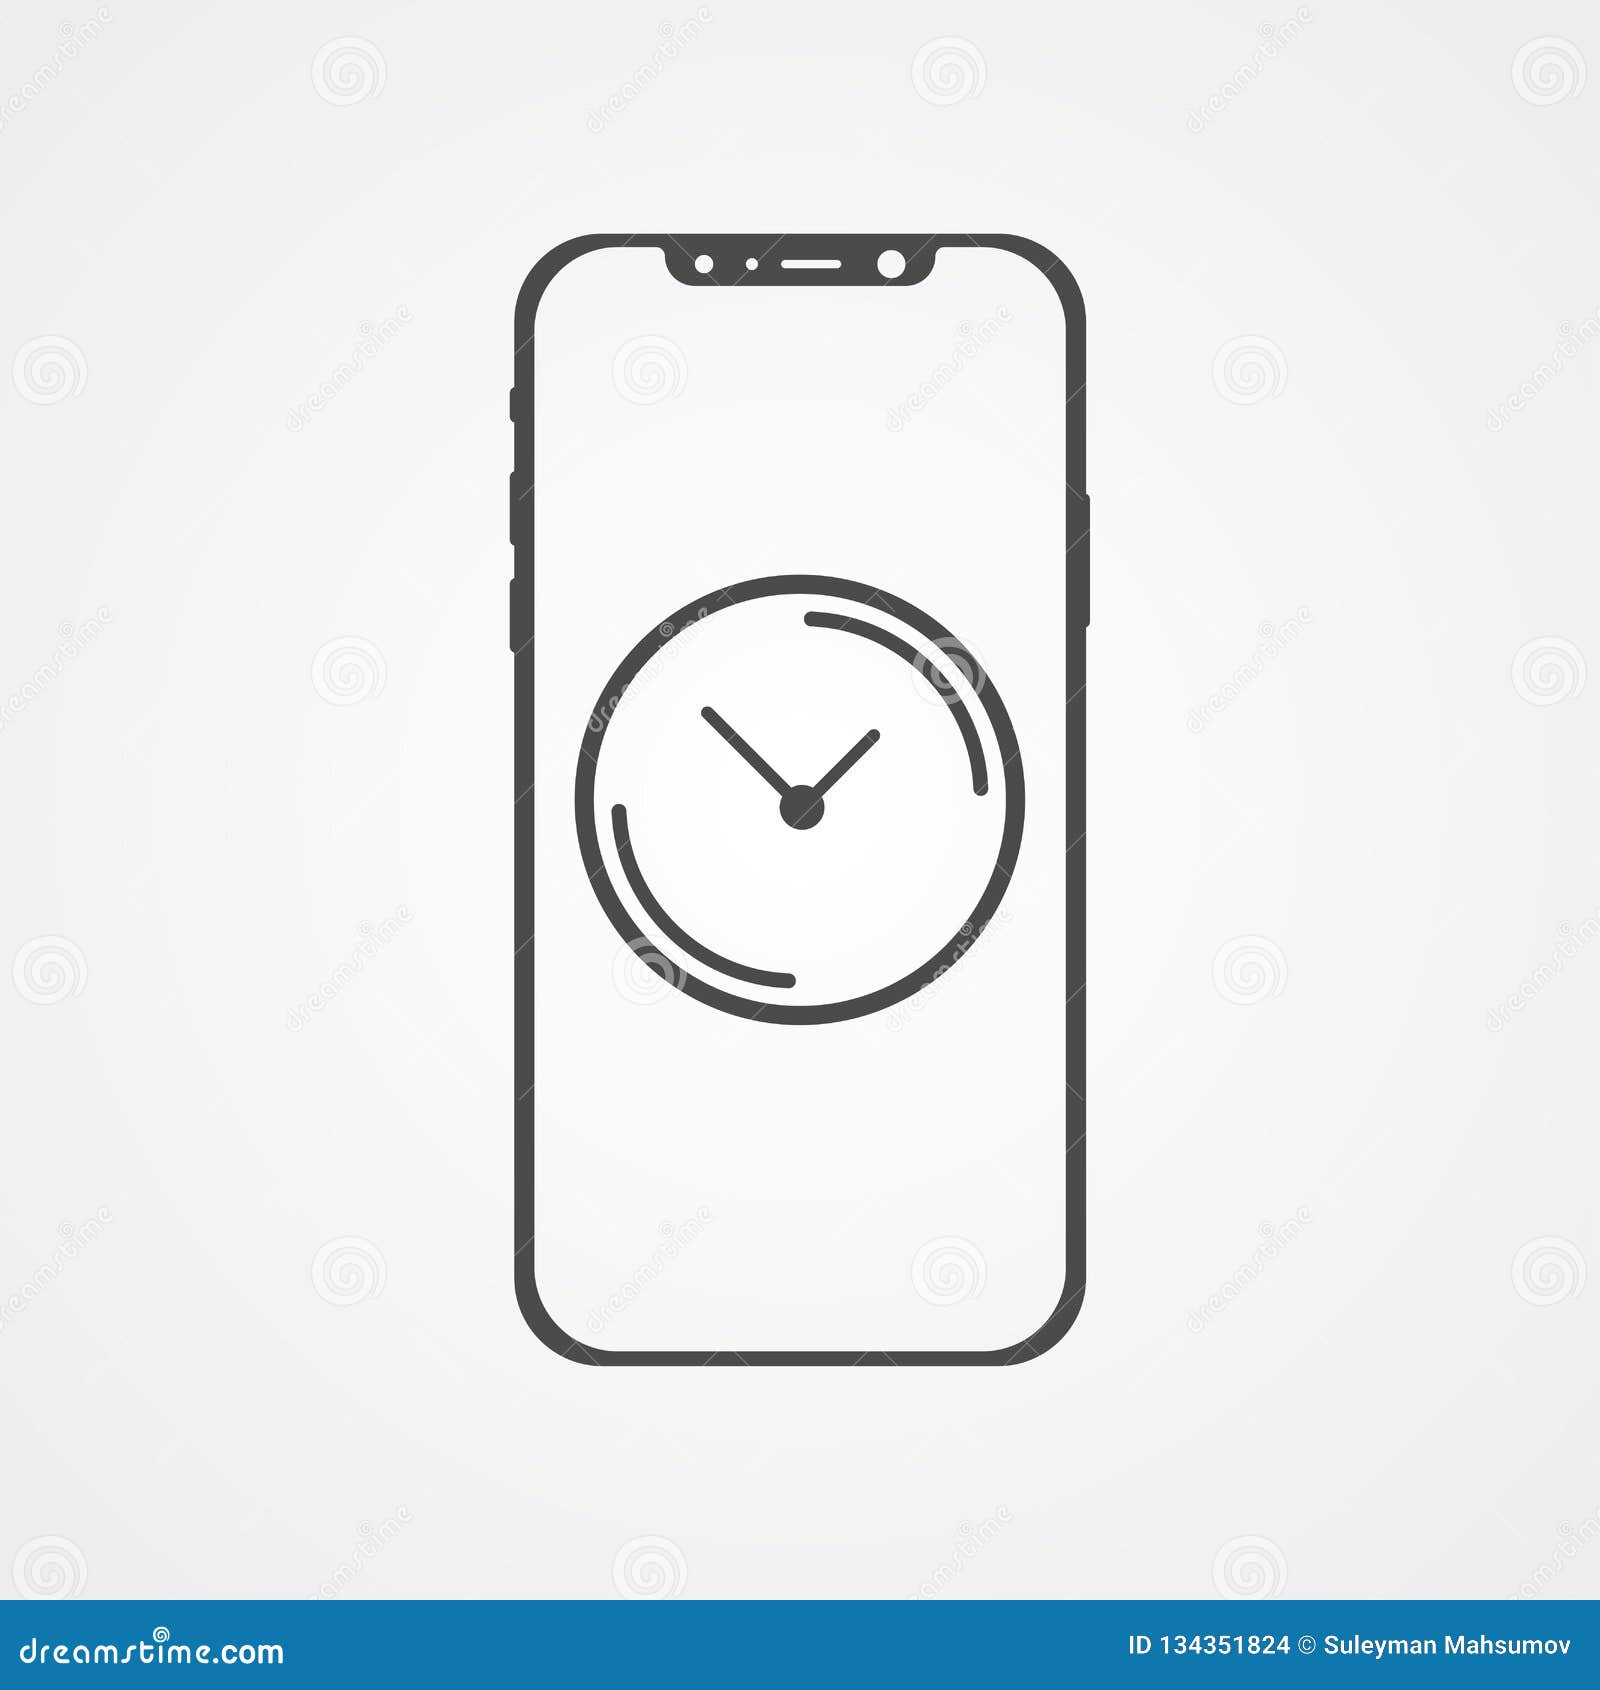 Phone With Clock Vector Icon Sign Symbol Stock Vector Illustration Of Object Phone 134351824